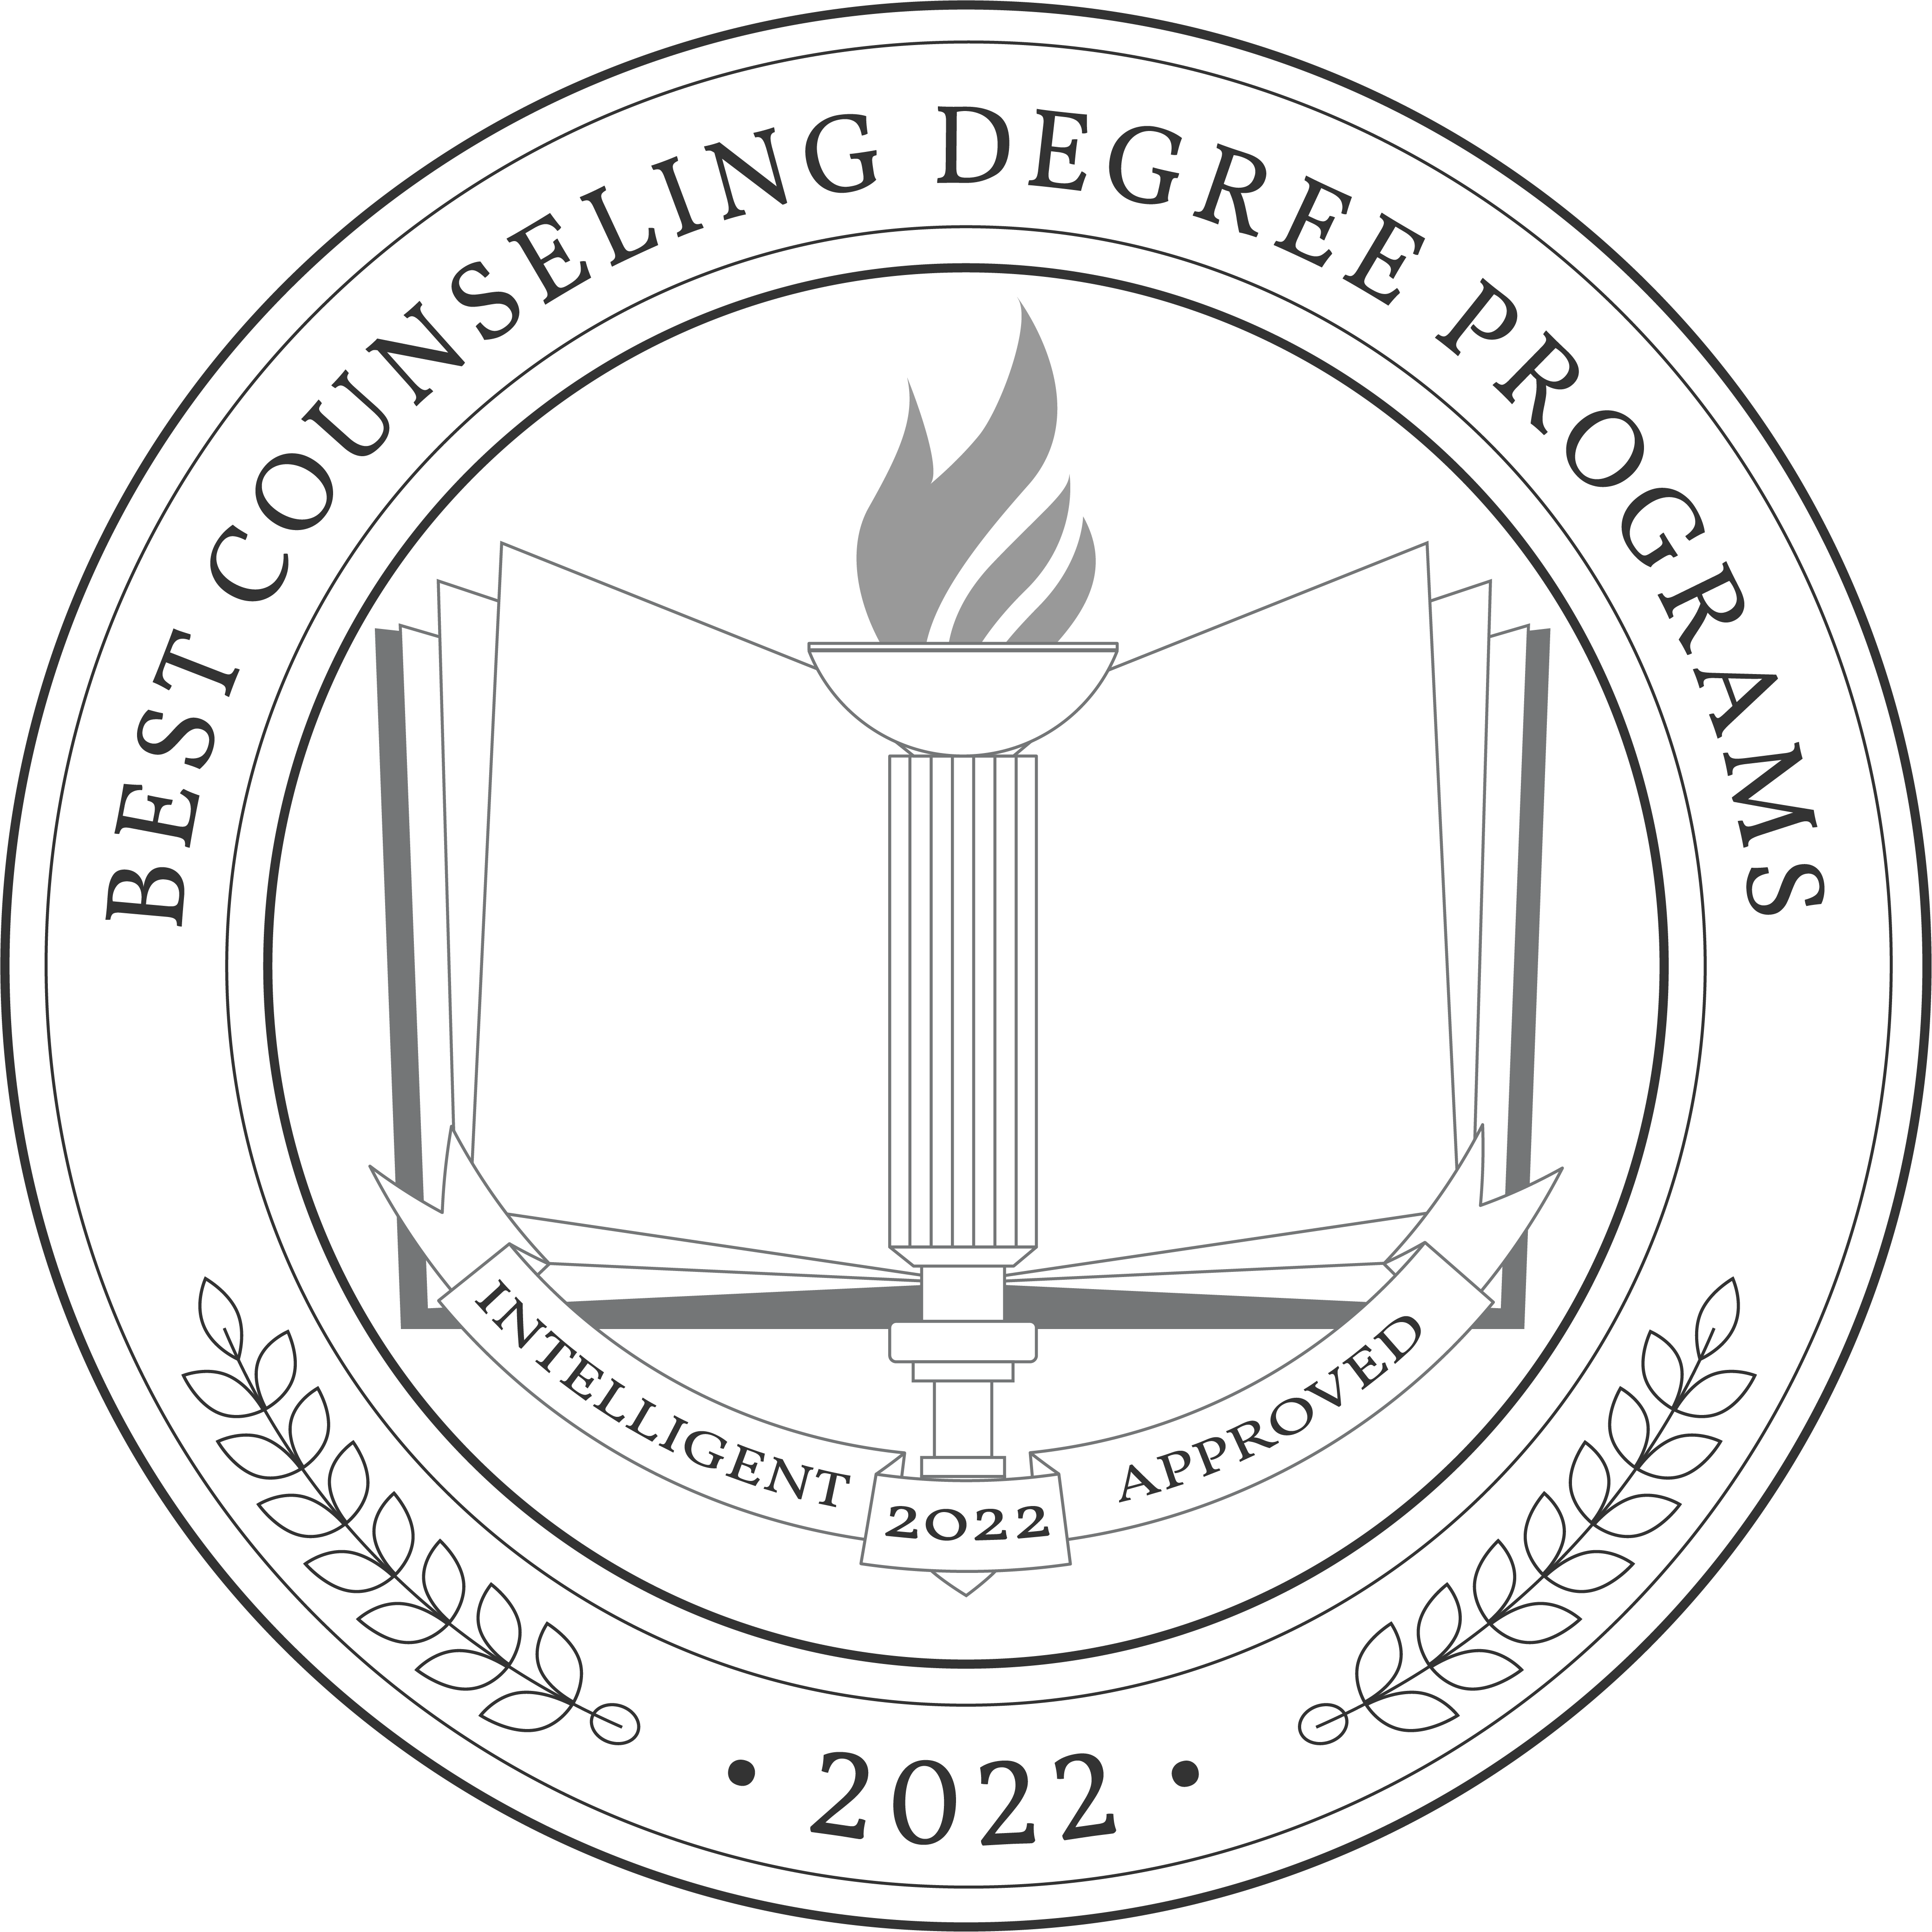 Best Counseling Degree Programs